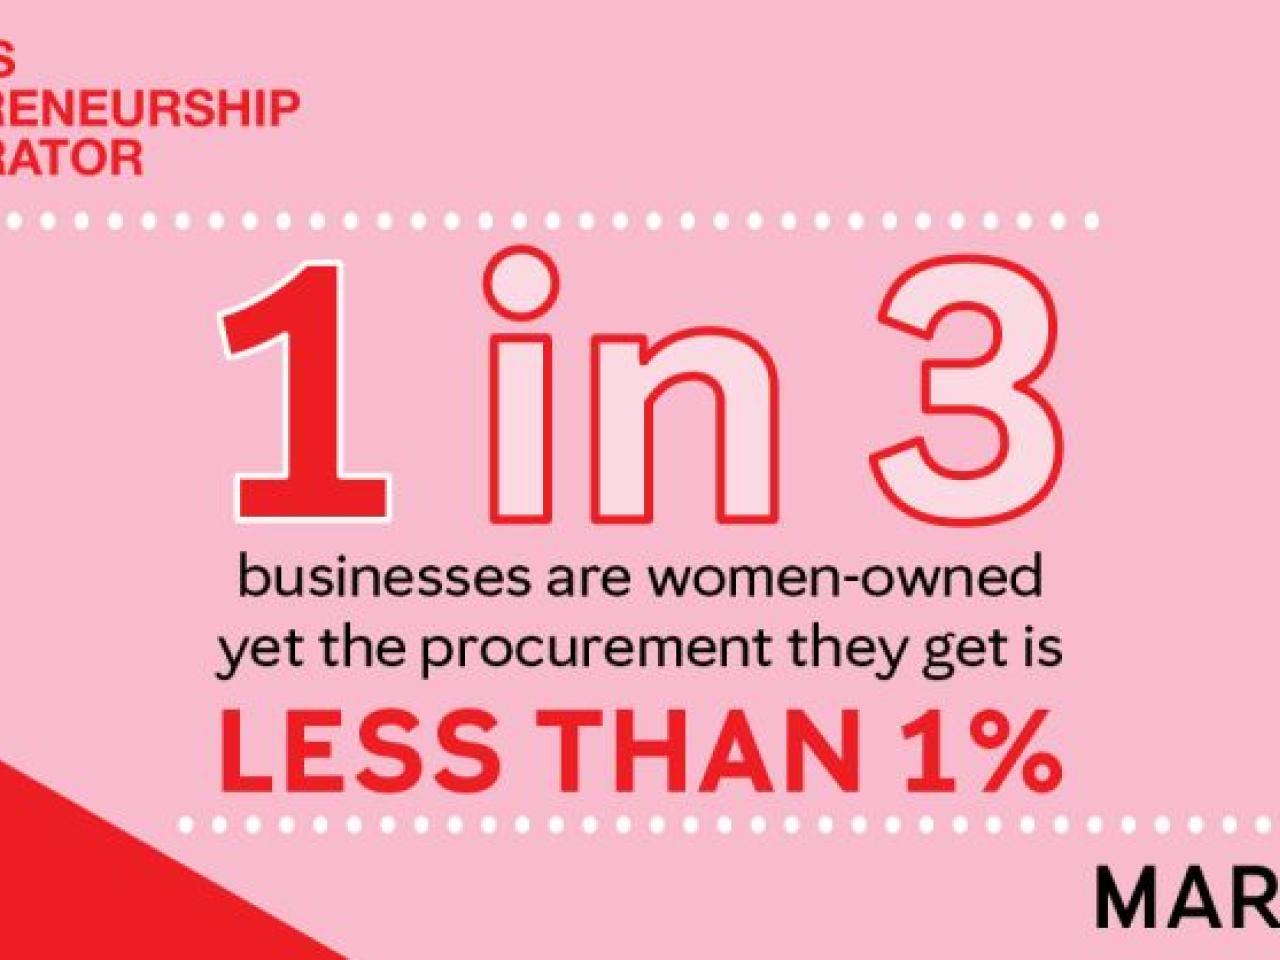 Info graphic "1 in 3 businesses are women-owned yet the procurement they get is less than 1%."